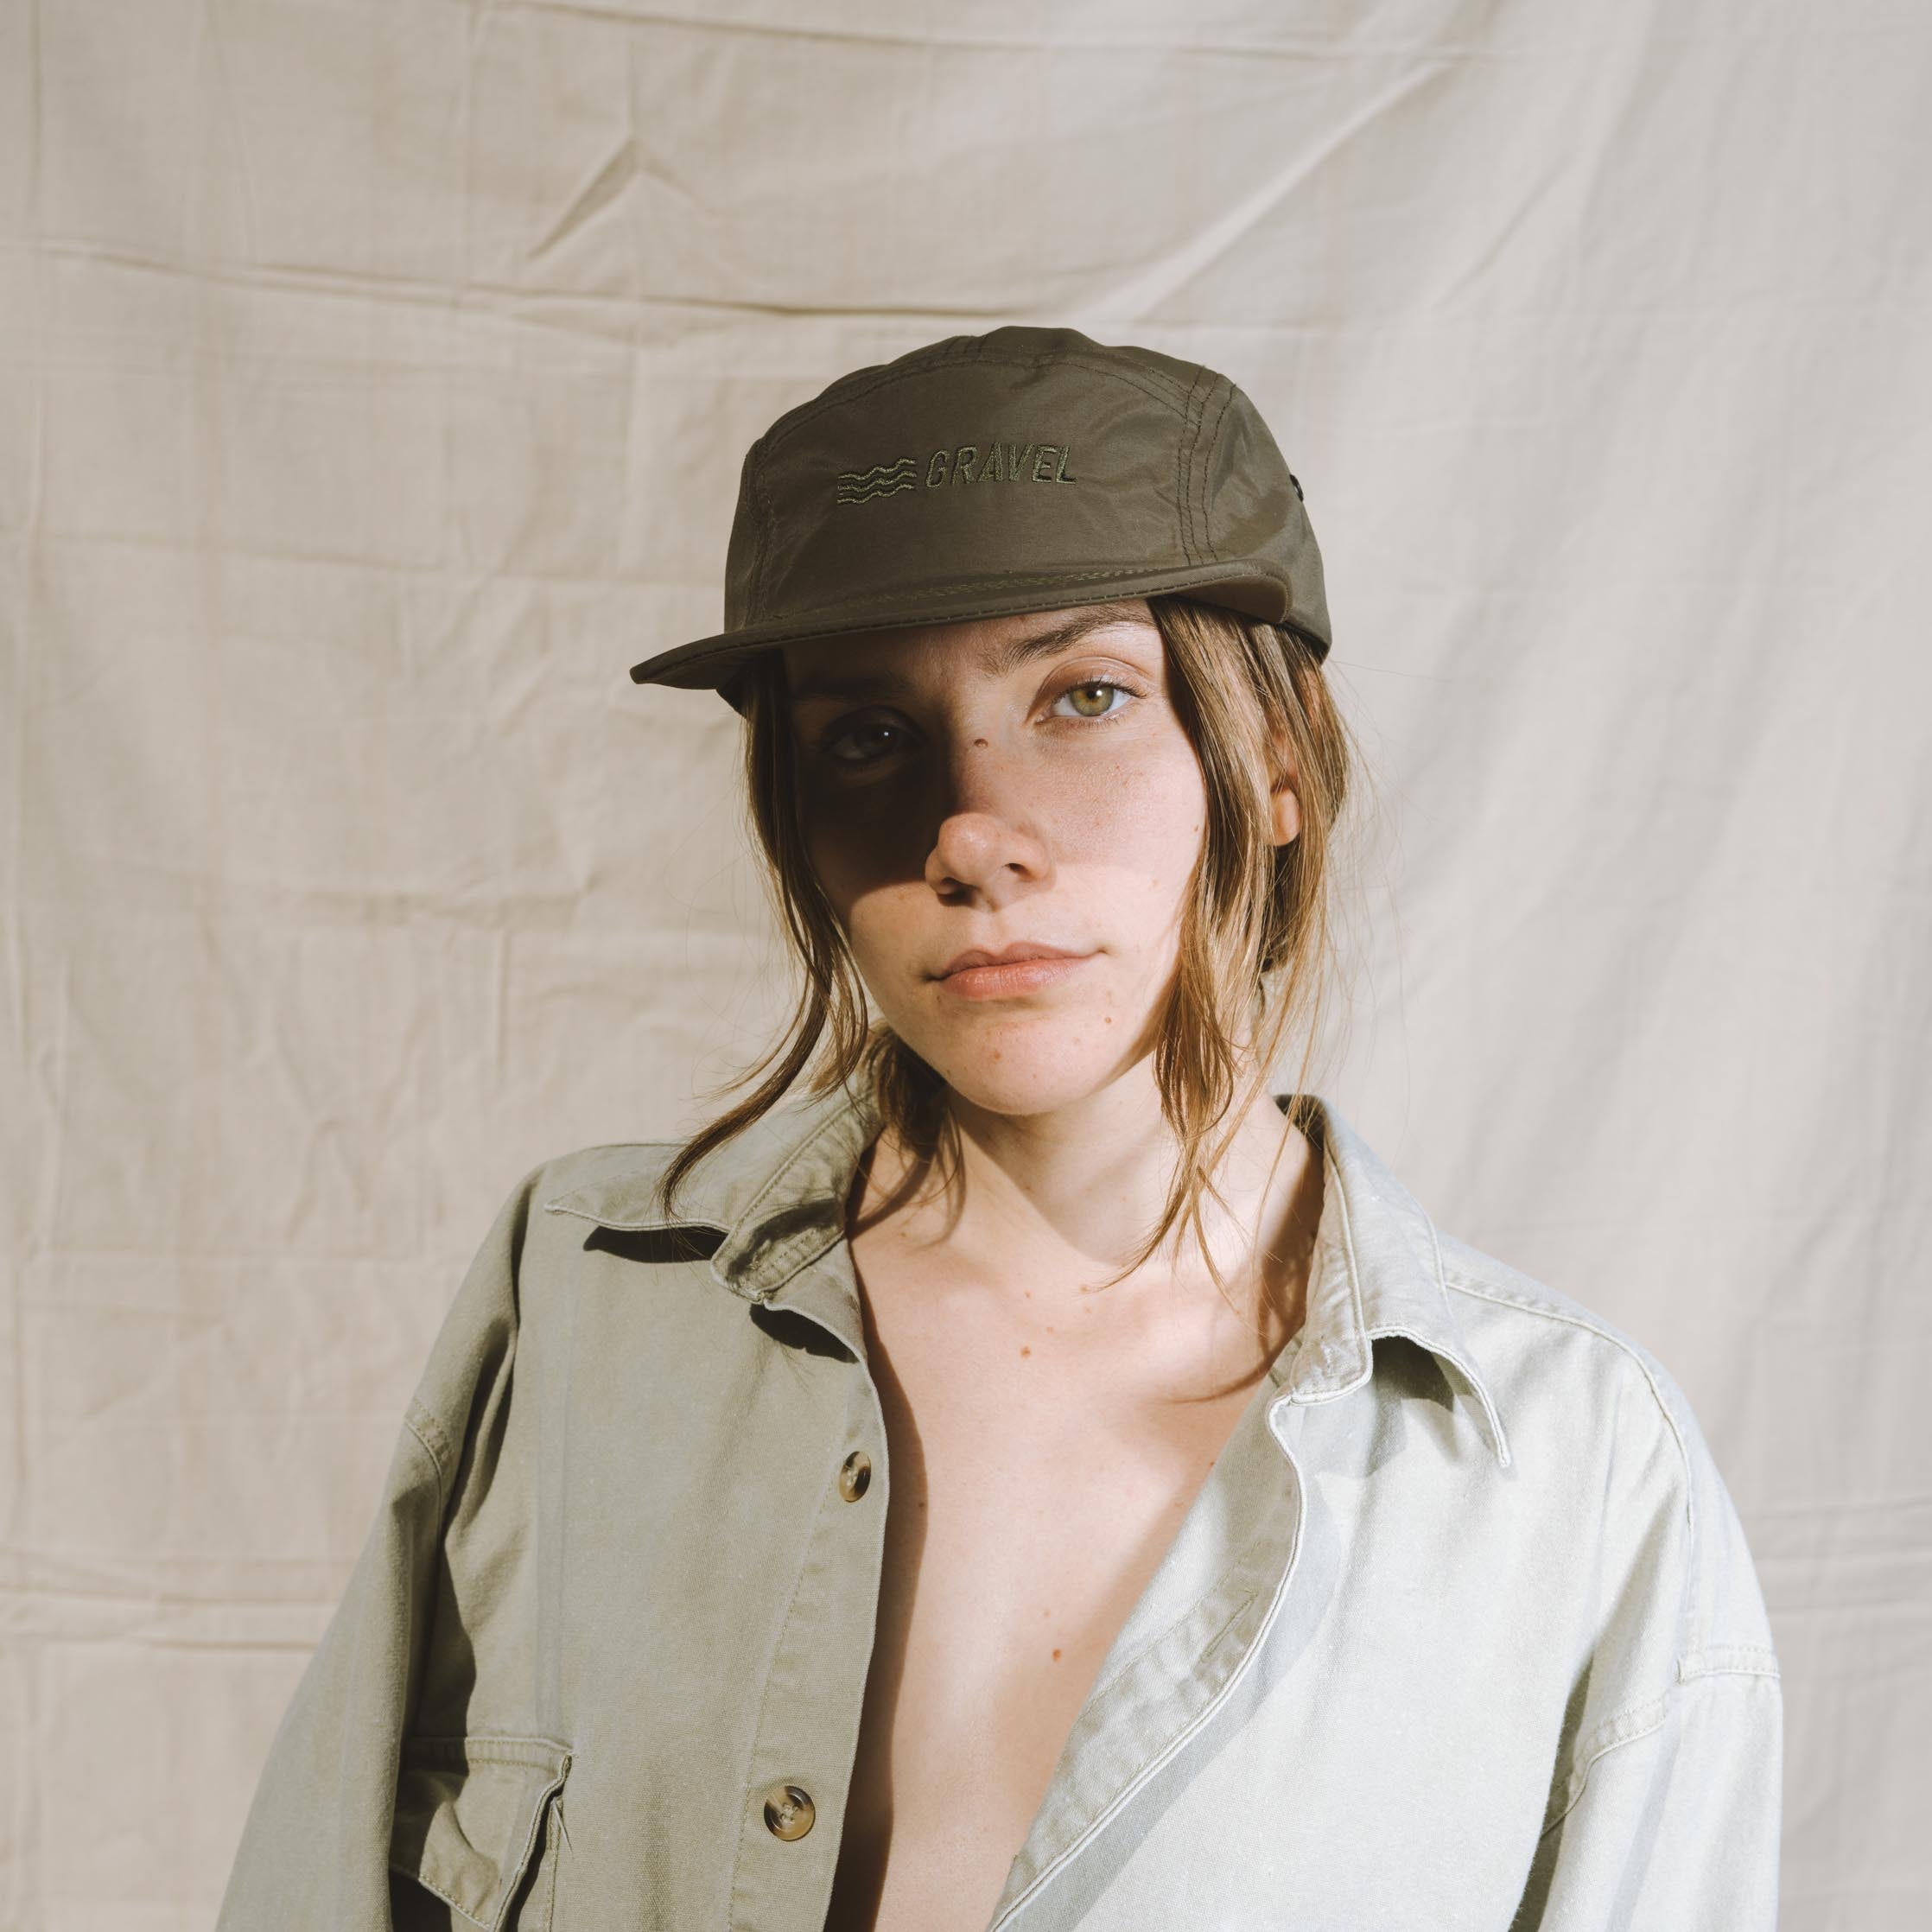 The Travelers Hat | Spruce